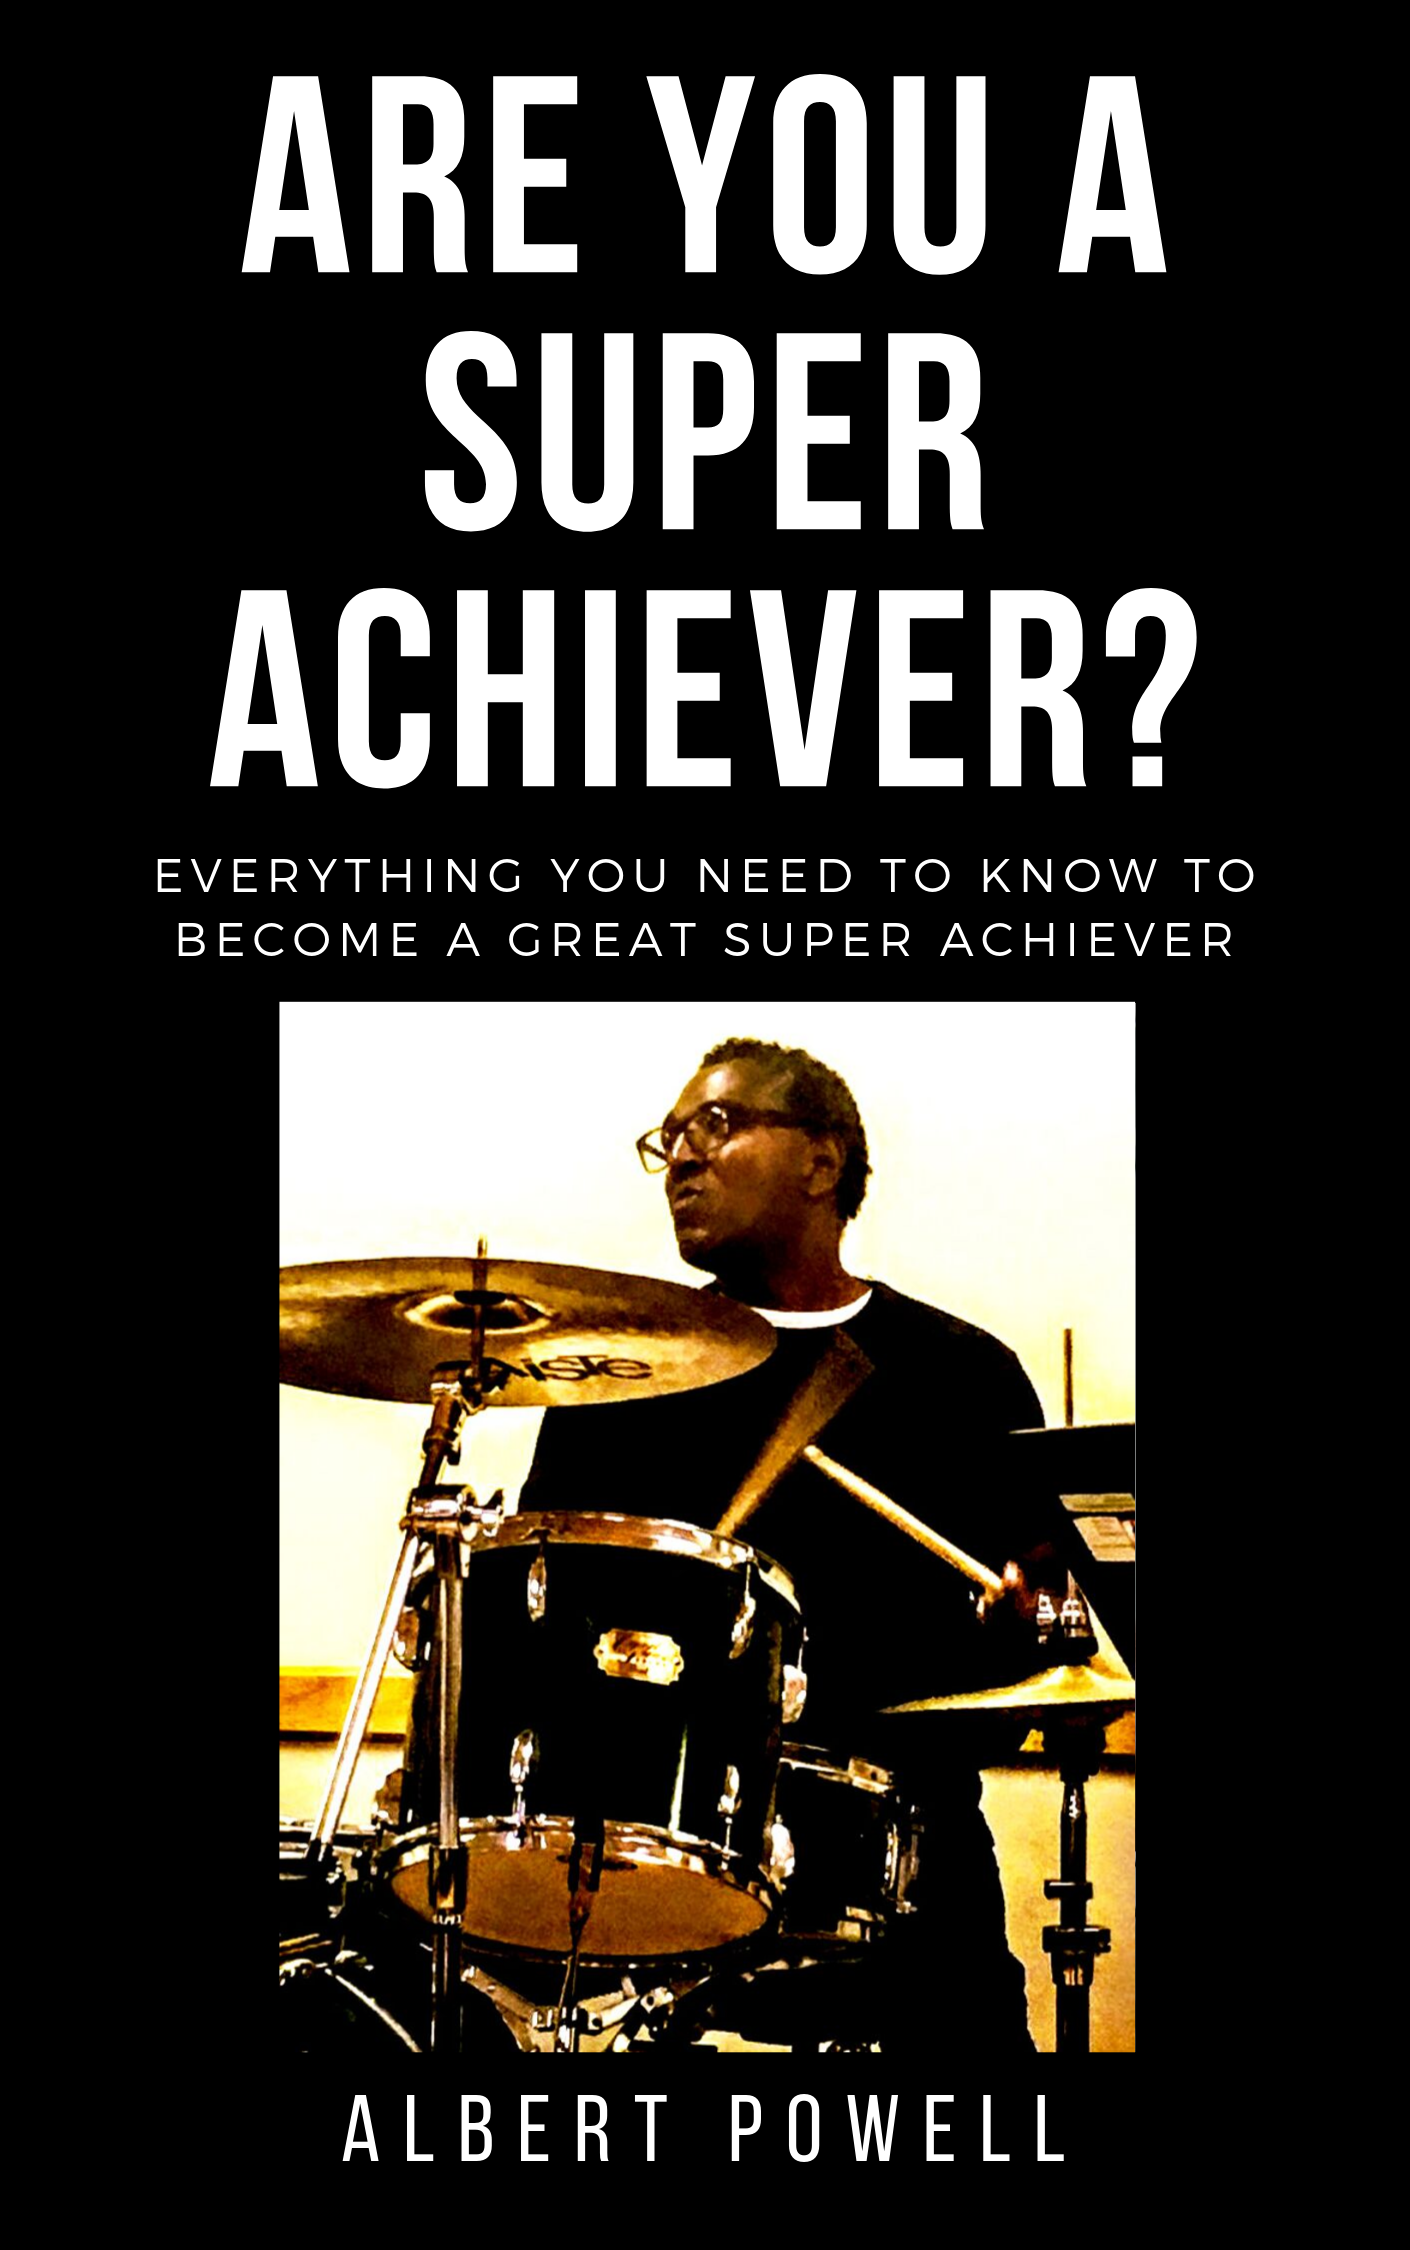 Are You A Super Achiever by Albert Powell